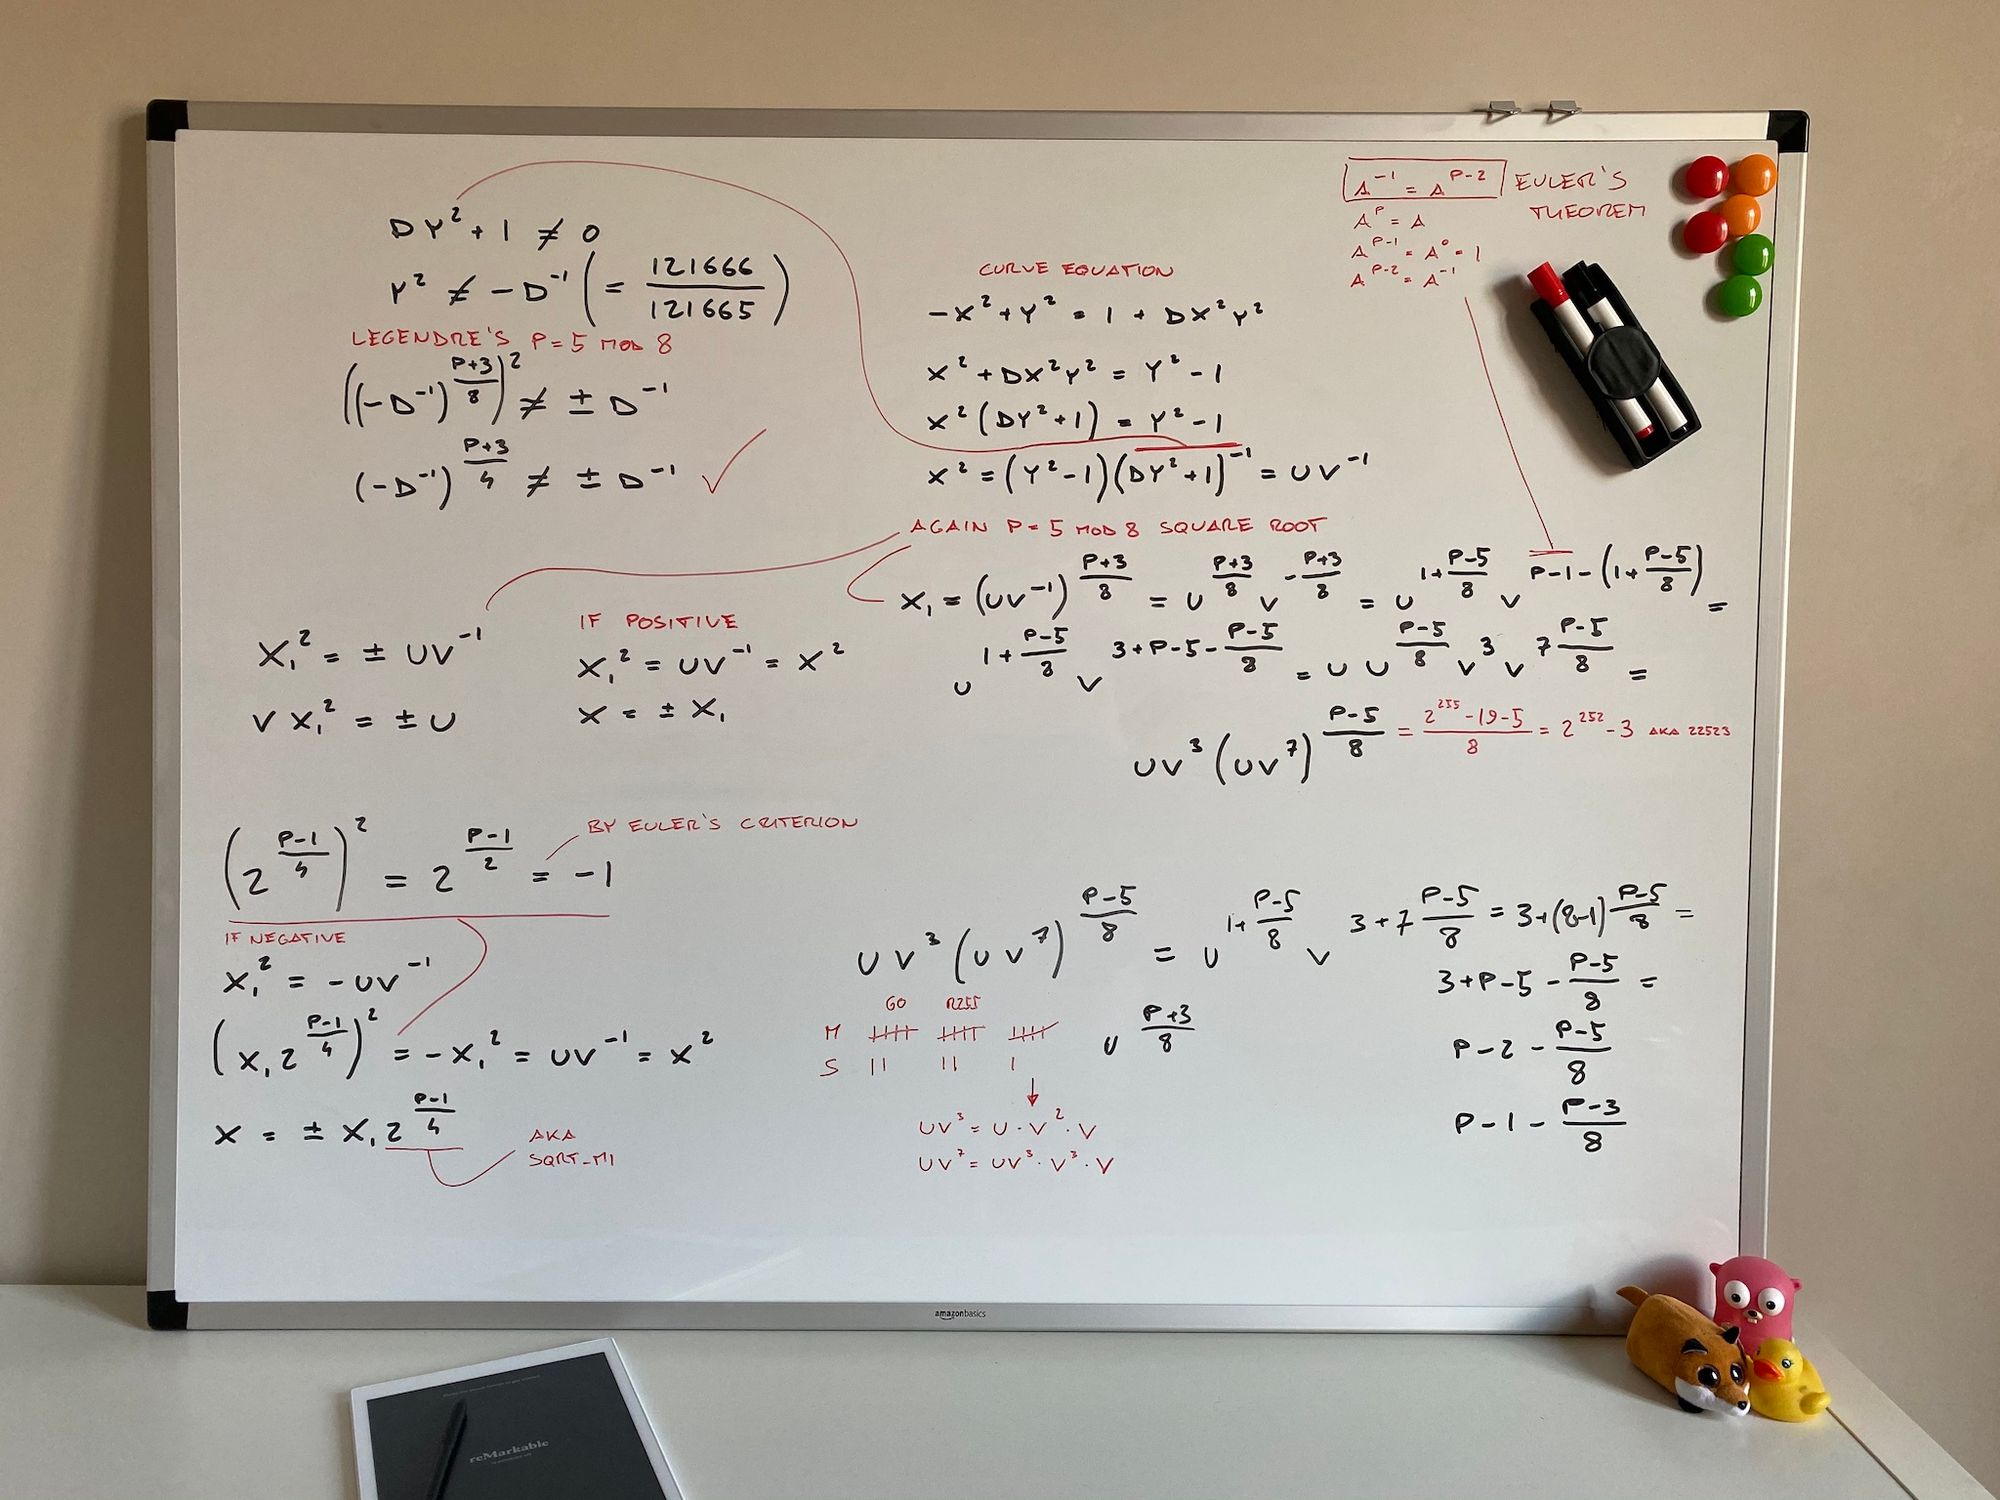 My whiteboard where I worked out the formulas in this issue